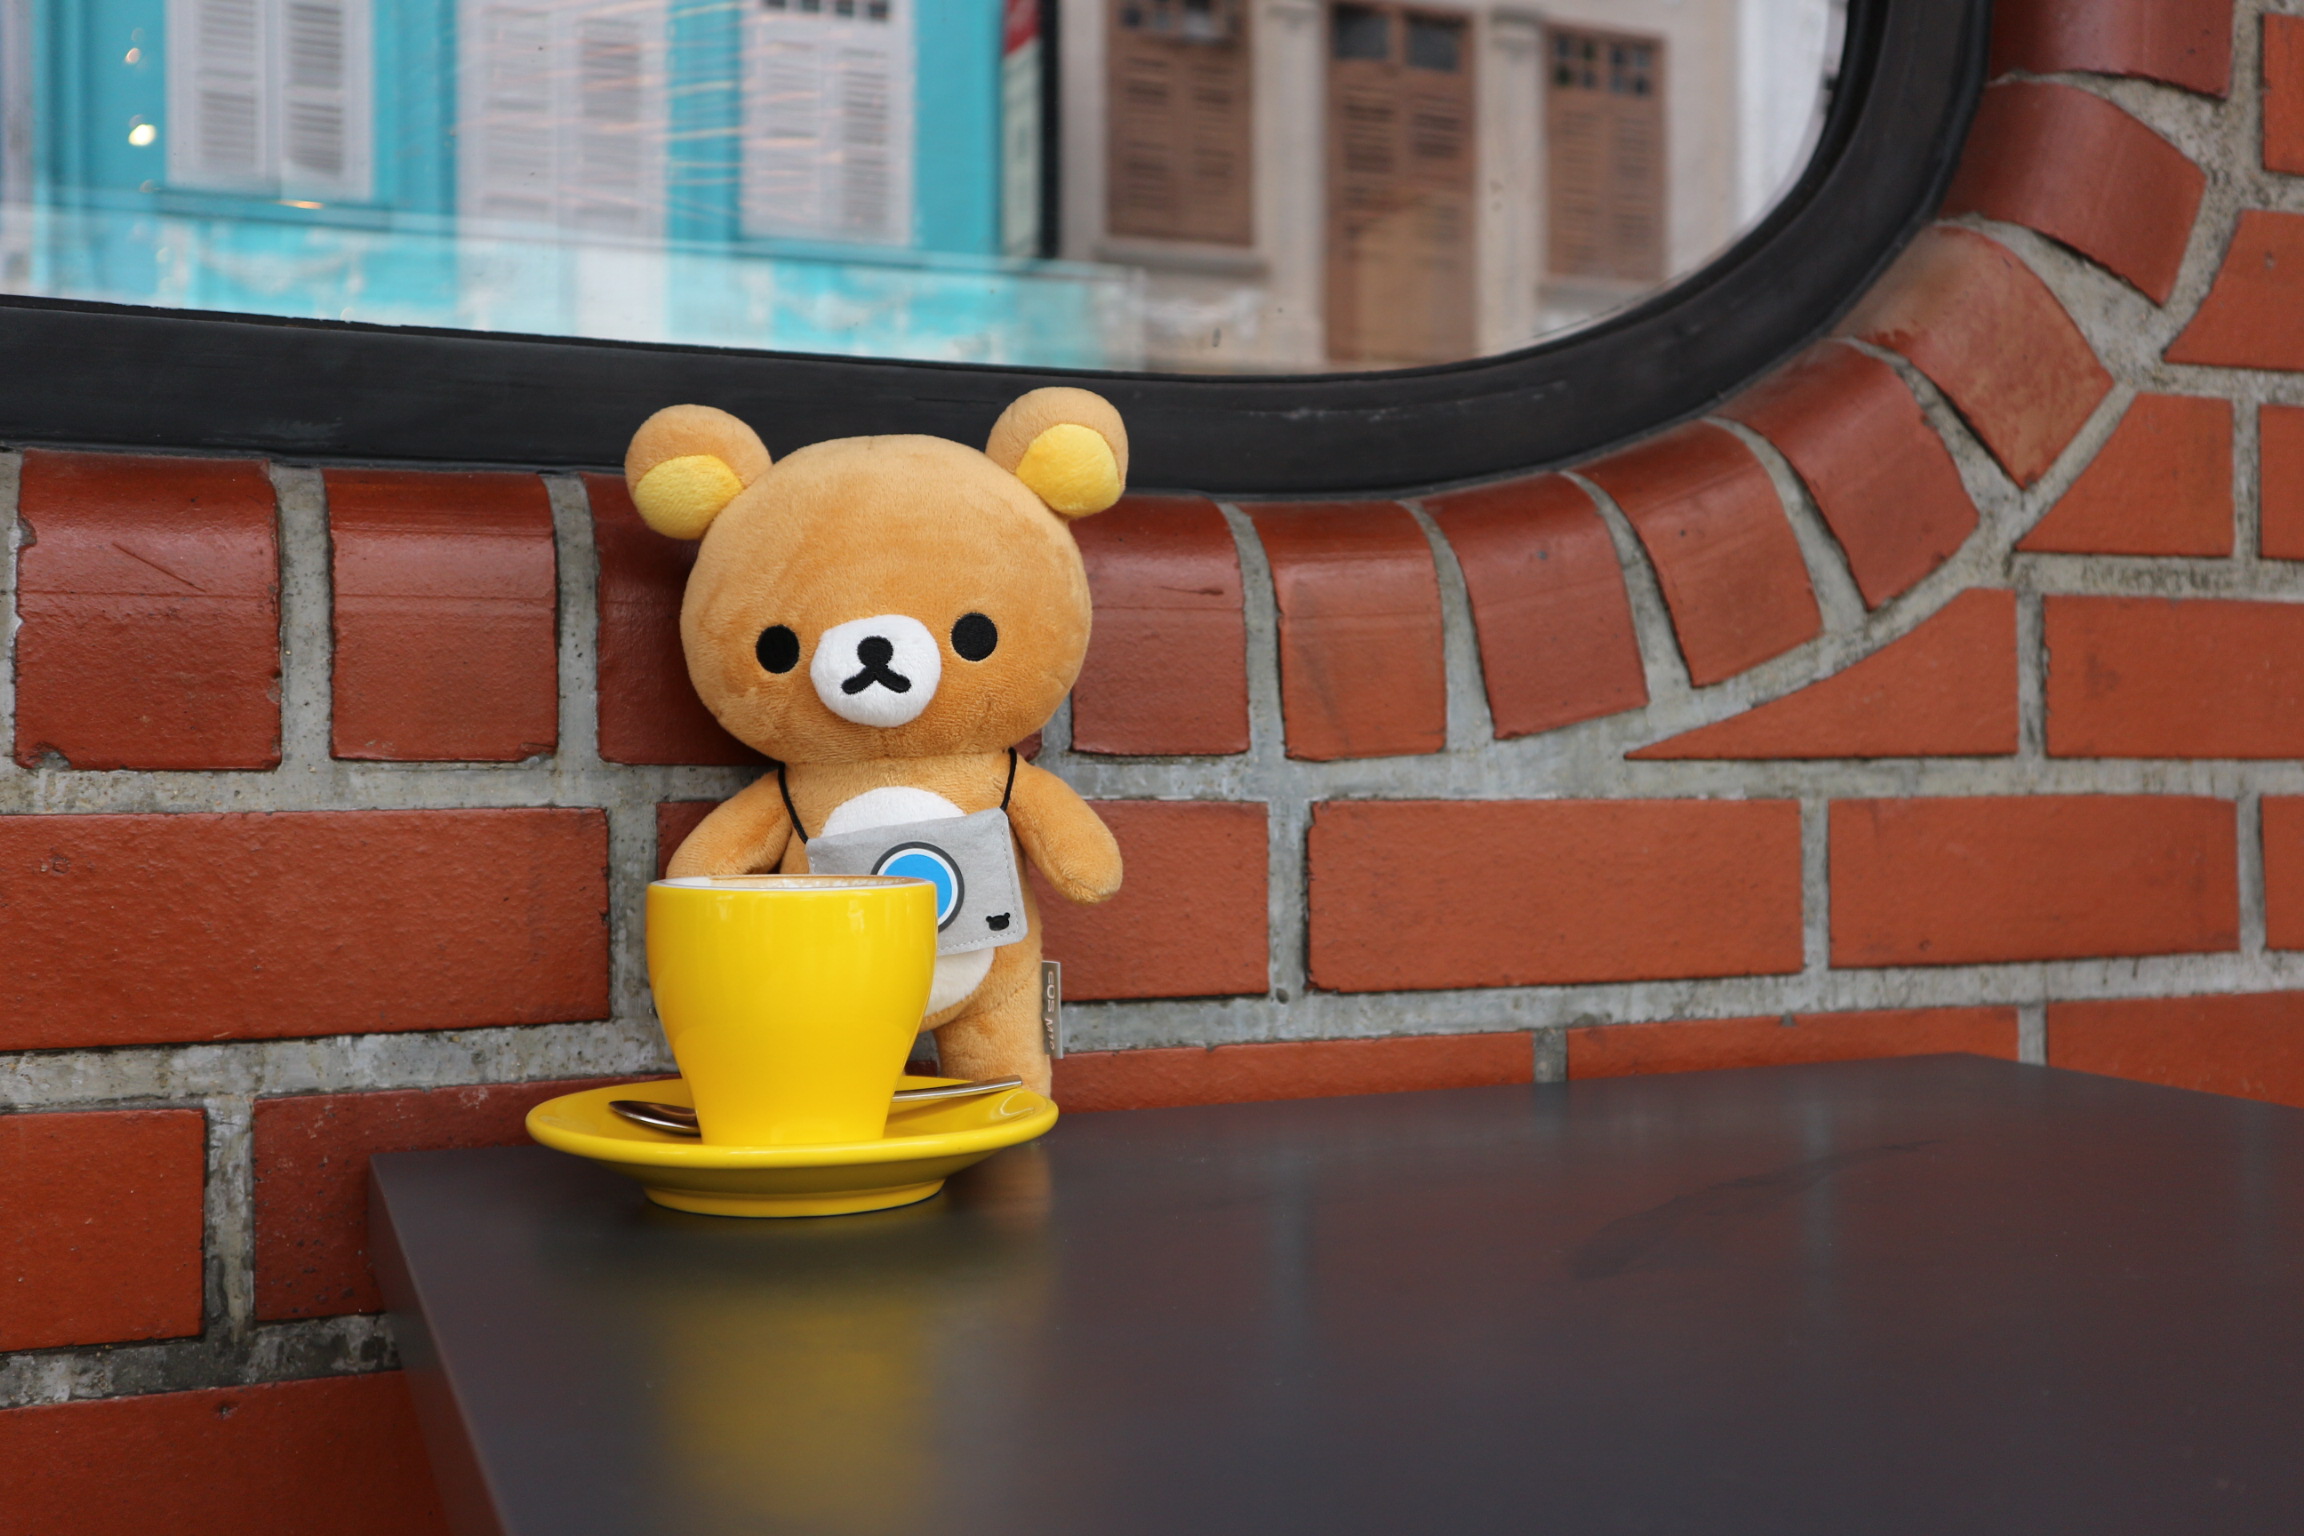 "Okay, all those posing is tiring. Now's my turn for a nice cup of chocolate latte."